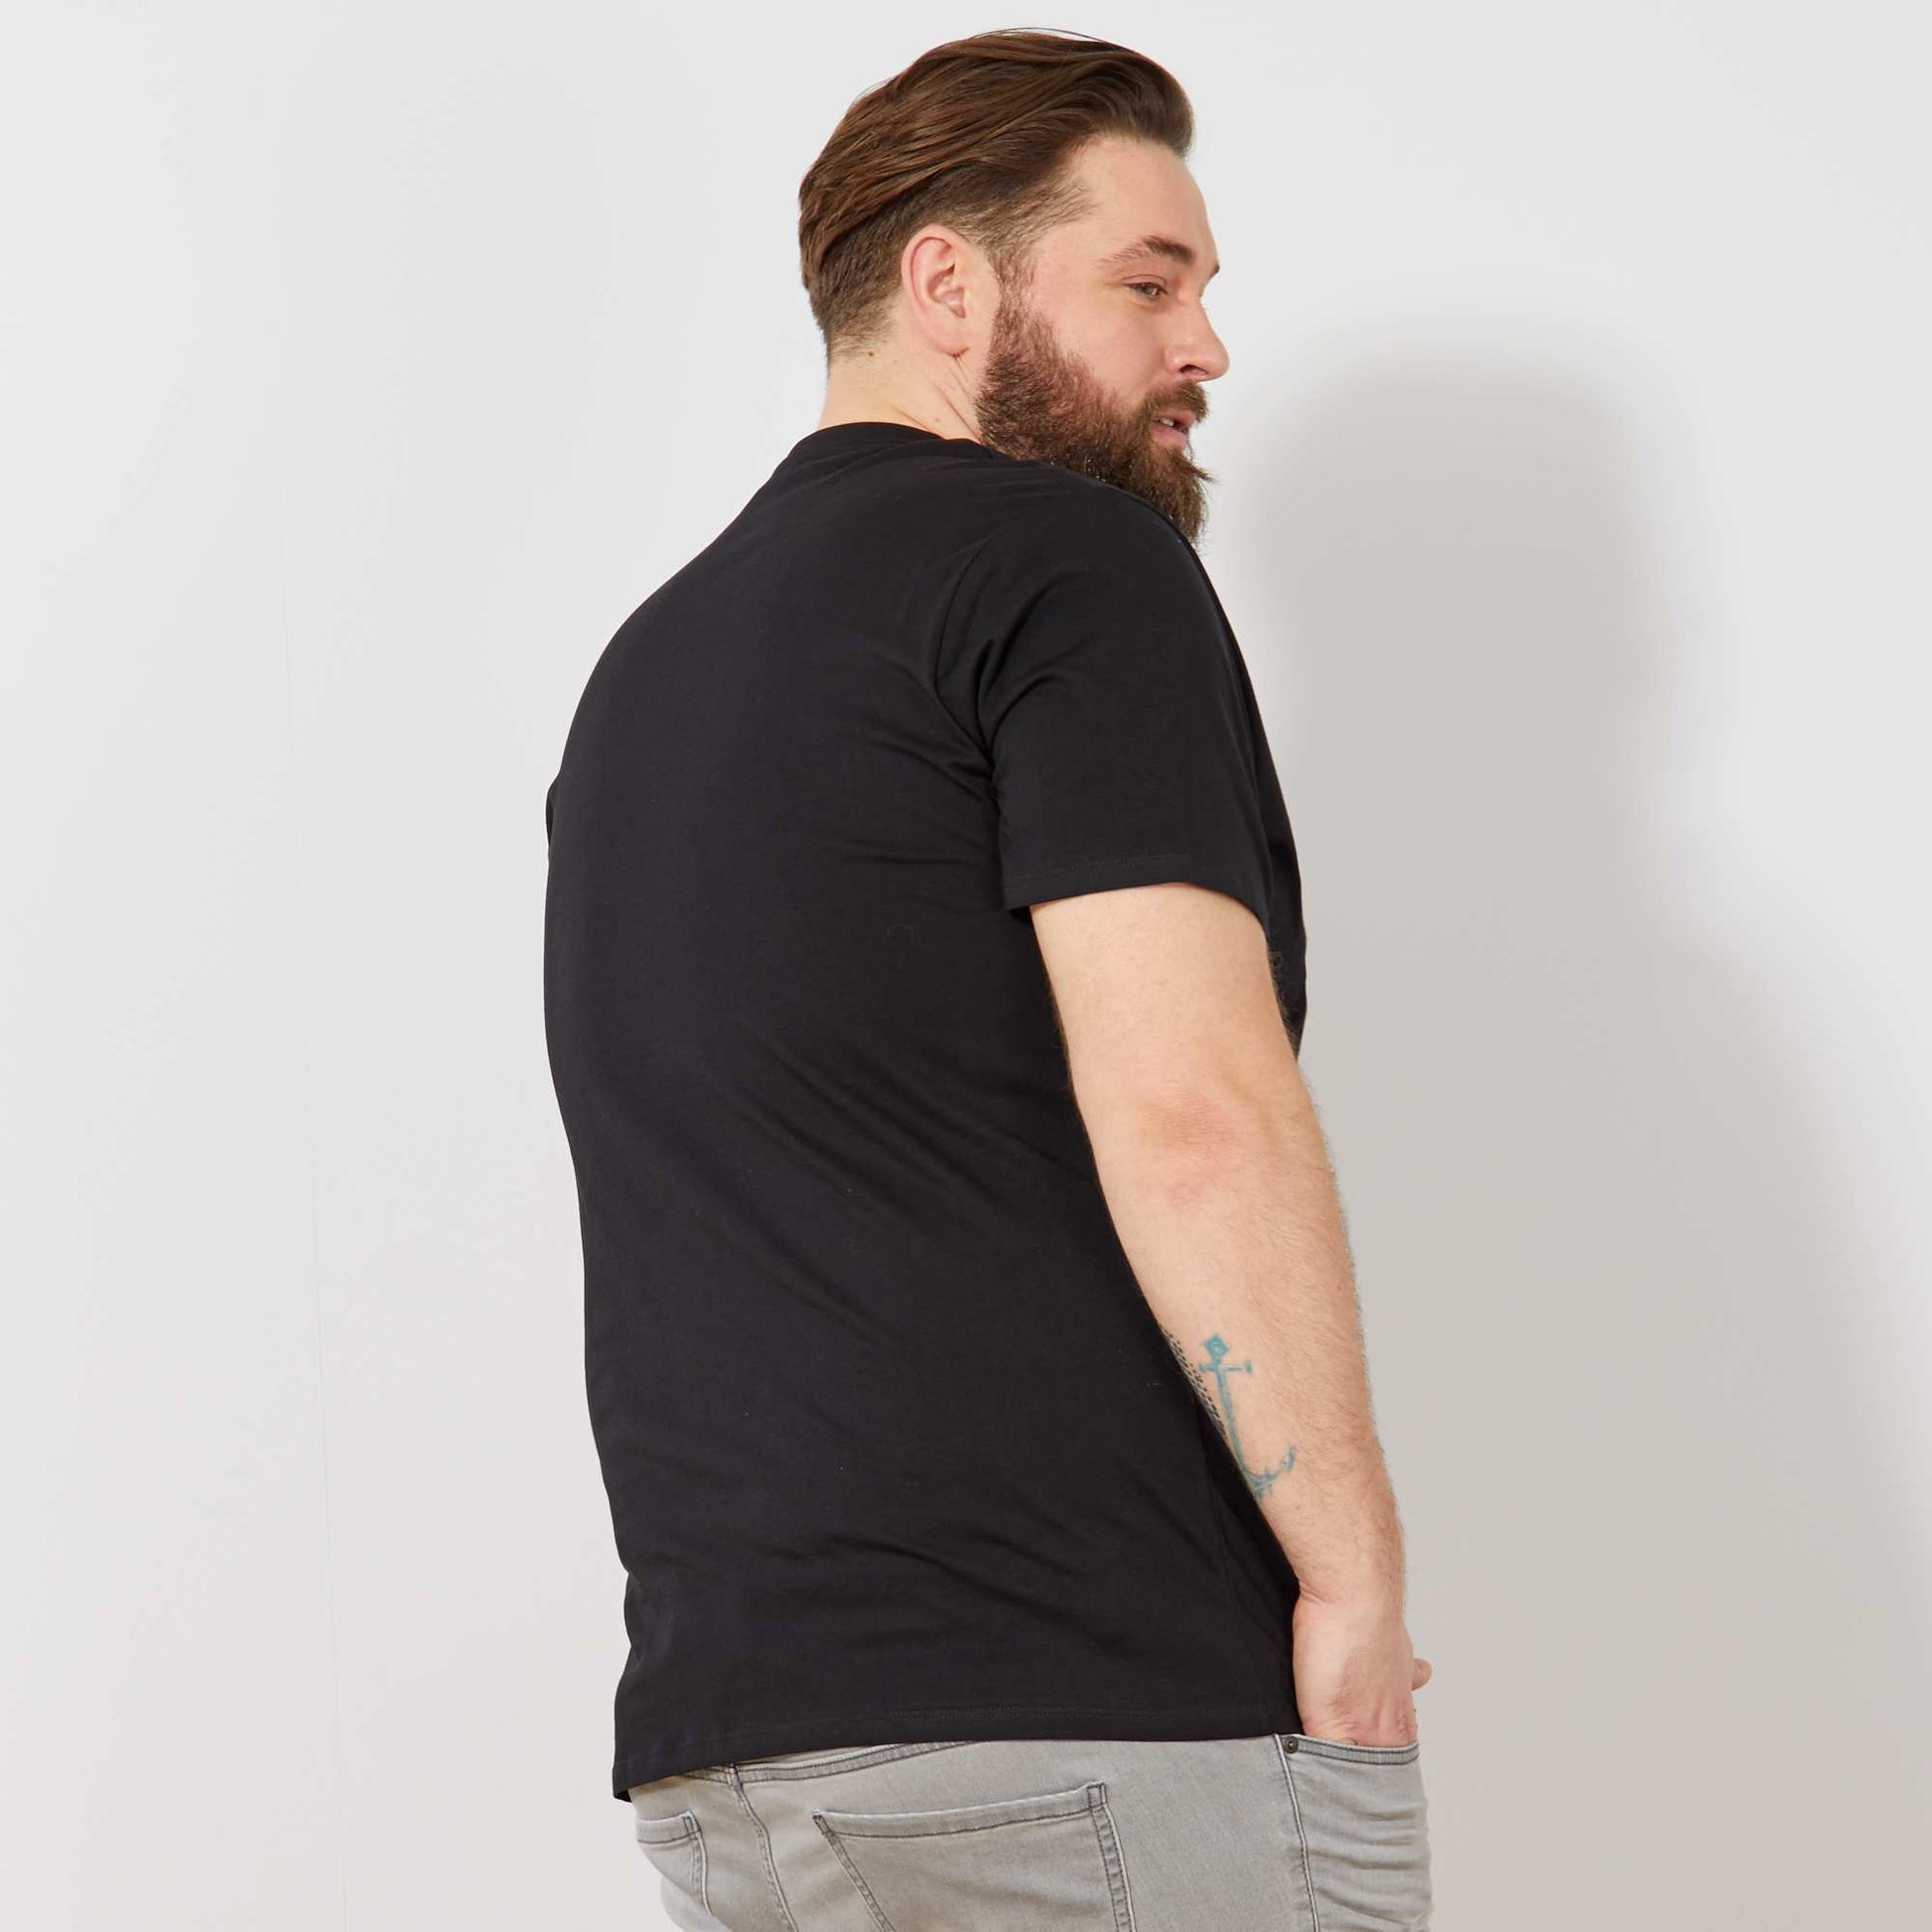 YEAHSO Dry Fit Tshirts Shirts For Men, Black Shirt (Color : Black, Size :  XL) : Buy Online at Best Price in KSA - Souq is now : Fashion